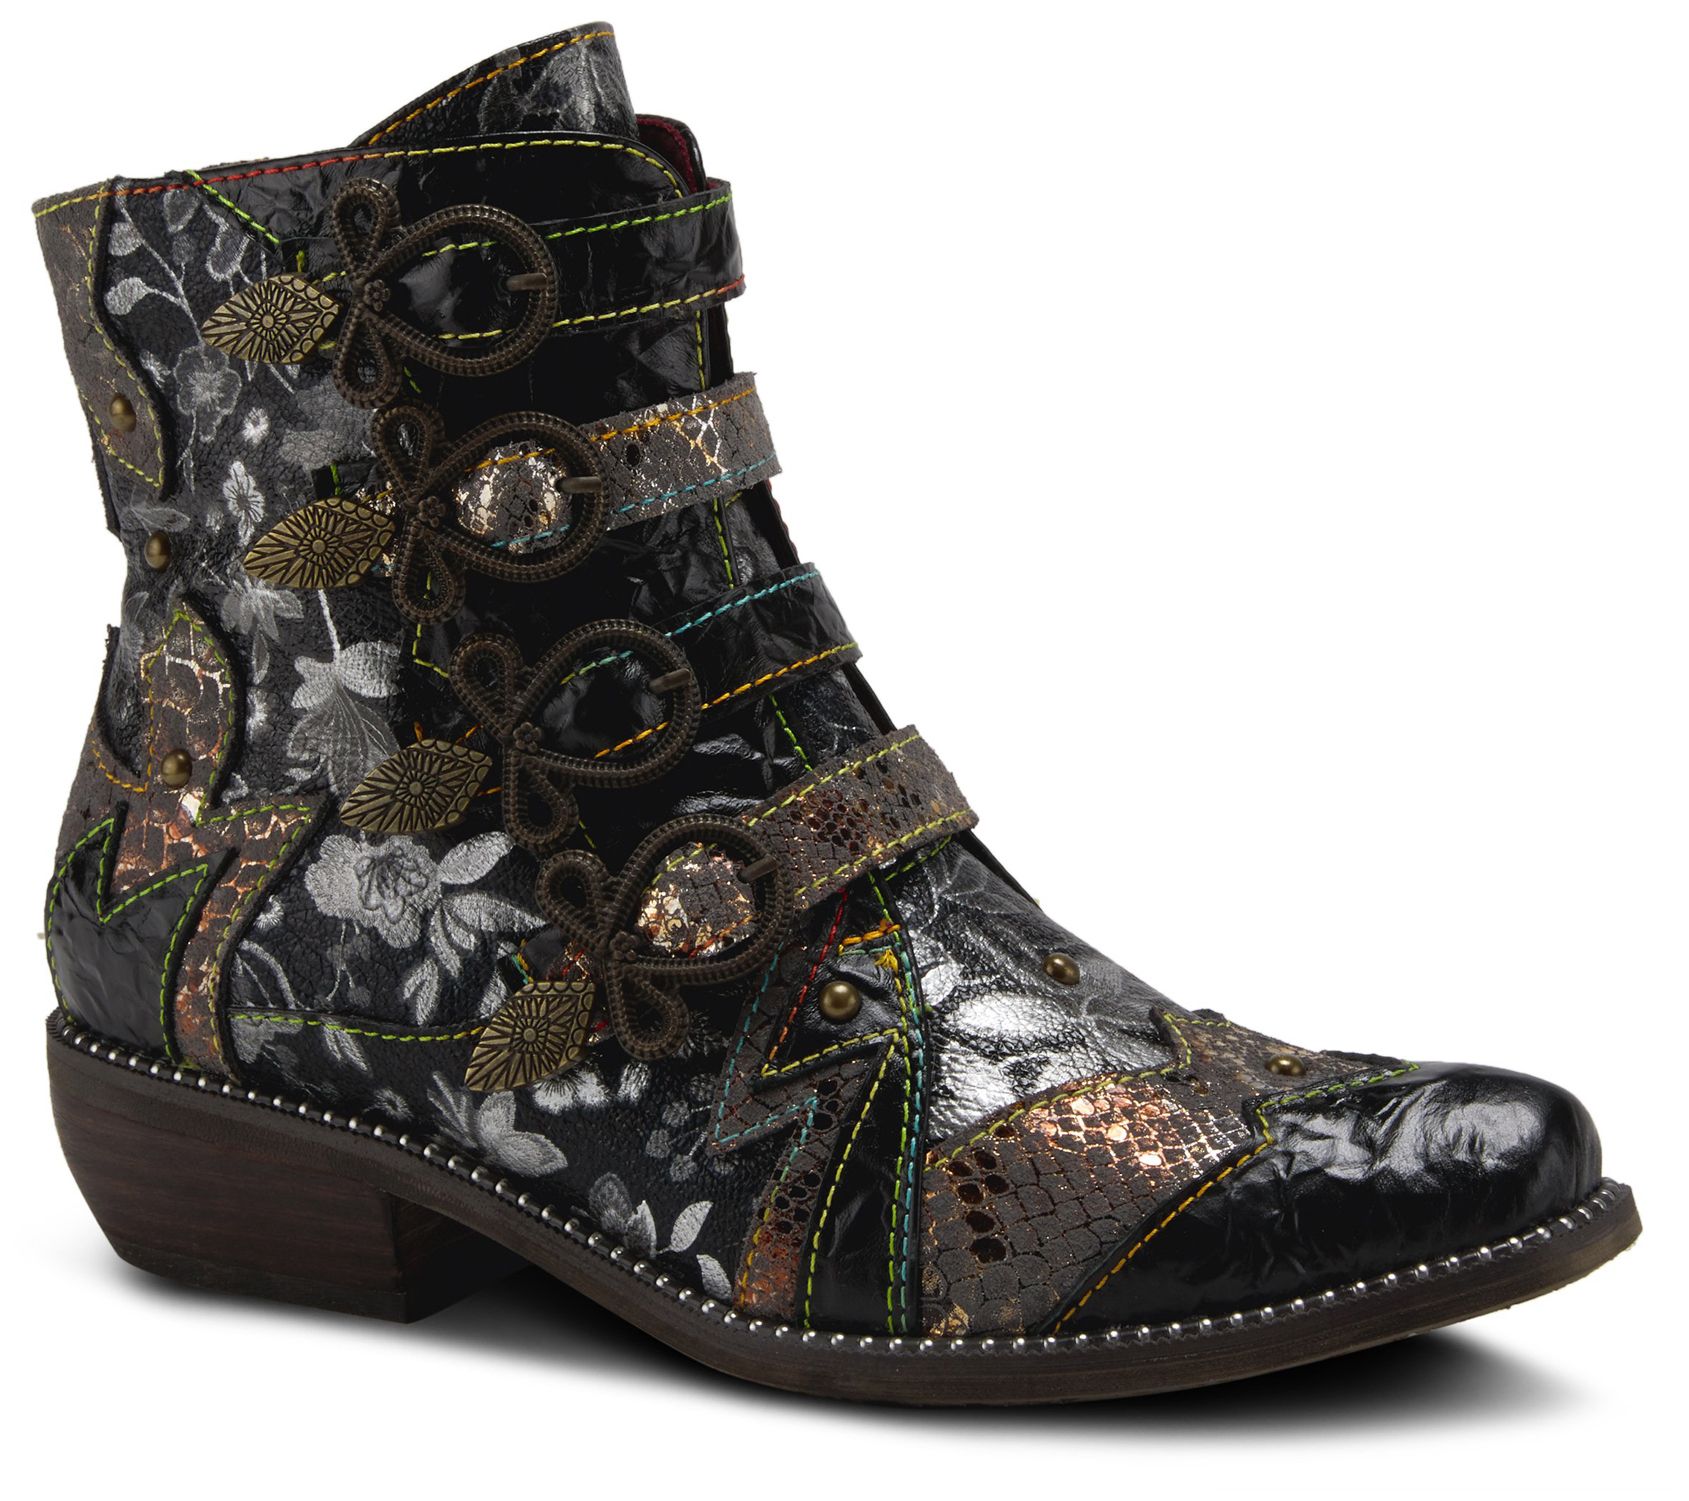 L'Artiste by Spring Step Leather Boots - Rodehadrive - QVC.com